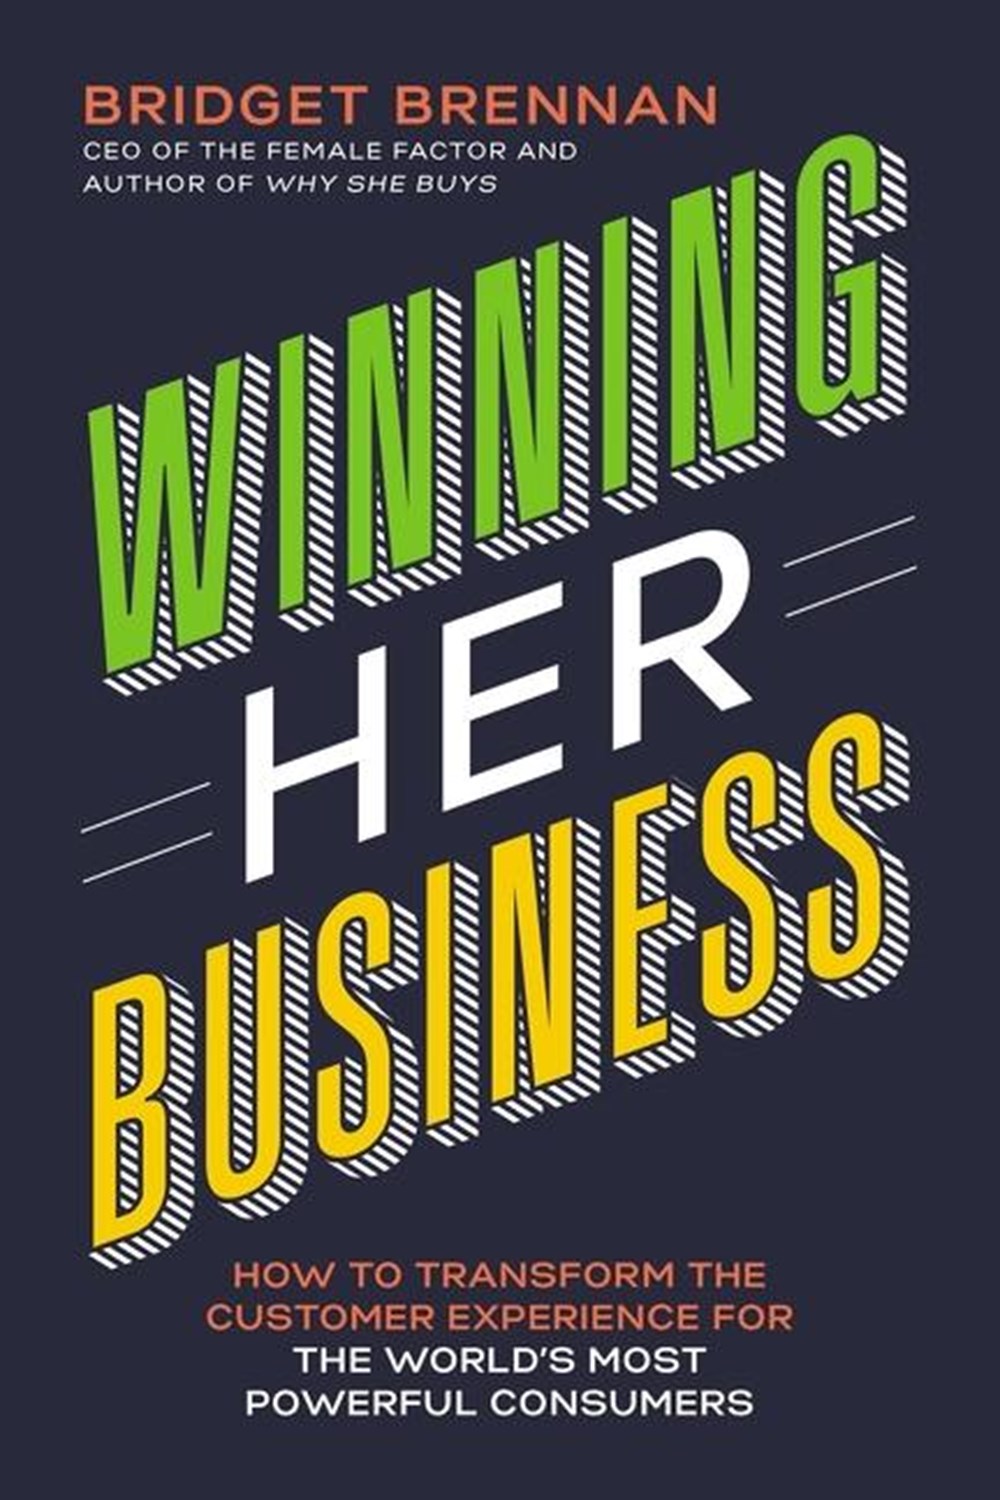 Winning Her Business: How to Transform the Customer Experience for the World's Most Powerful Consume